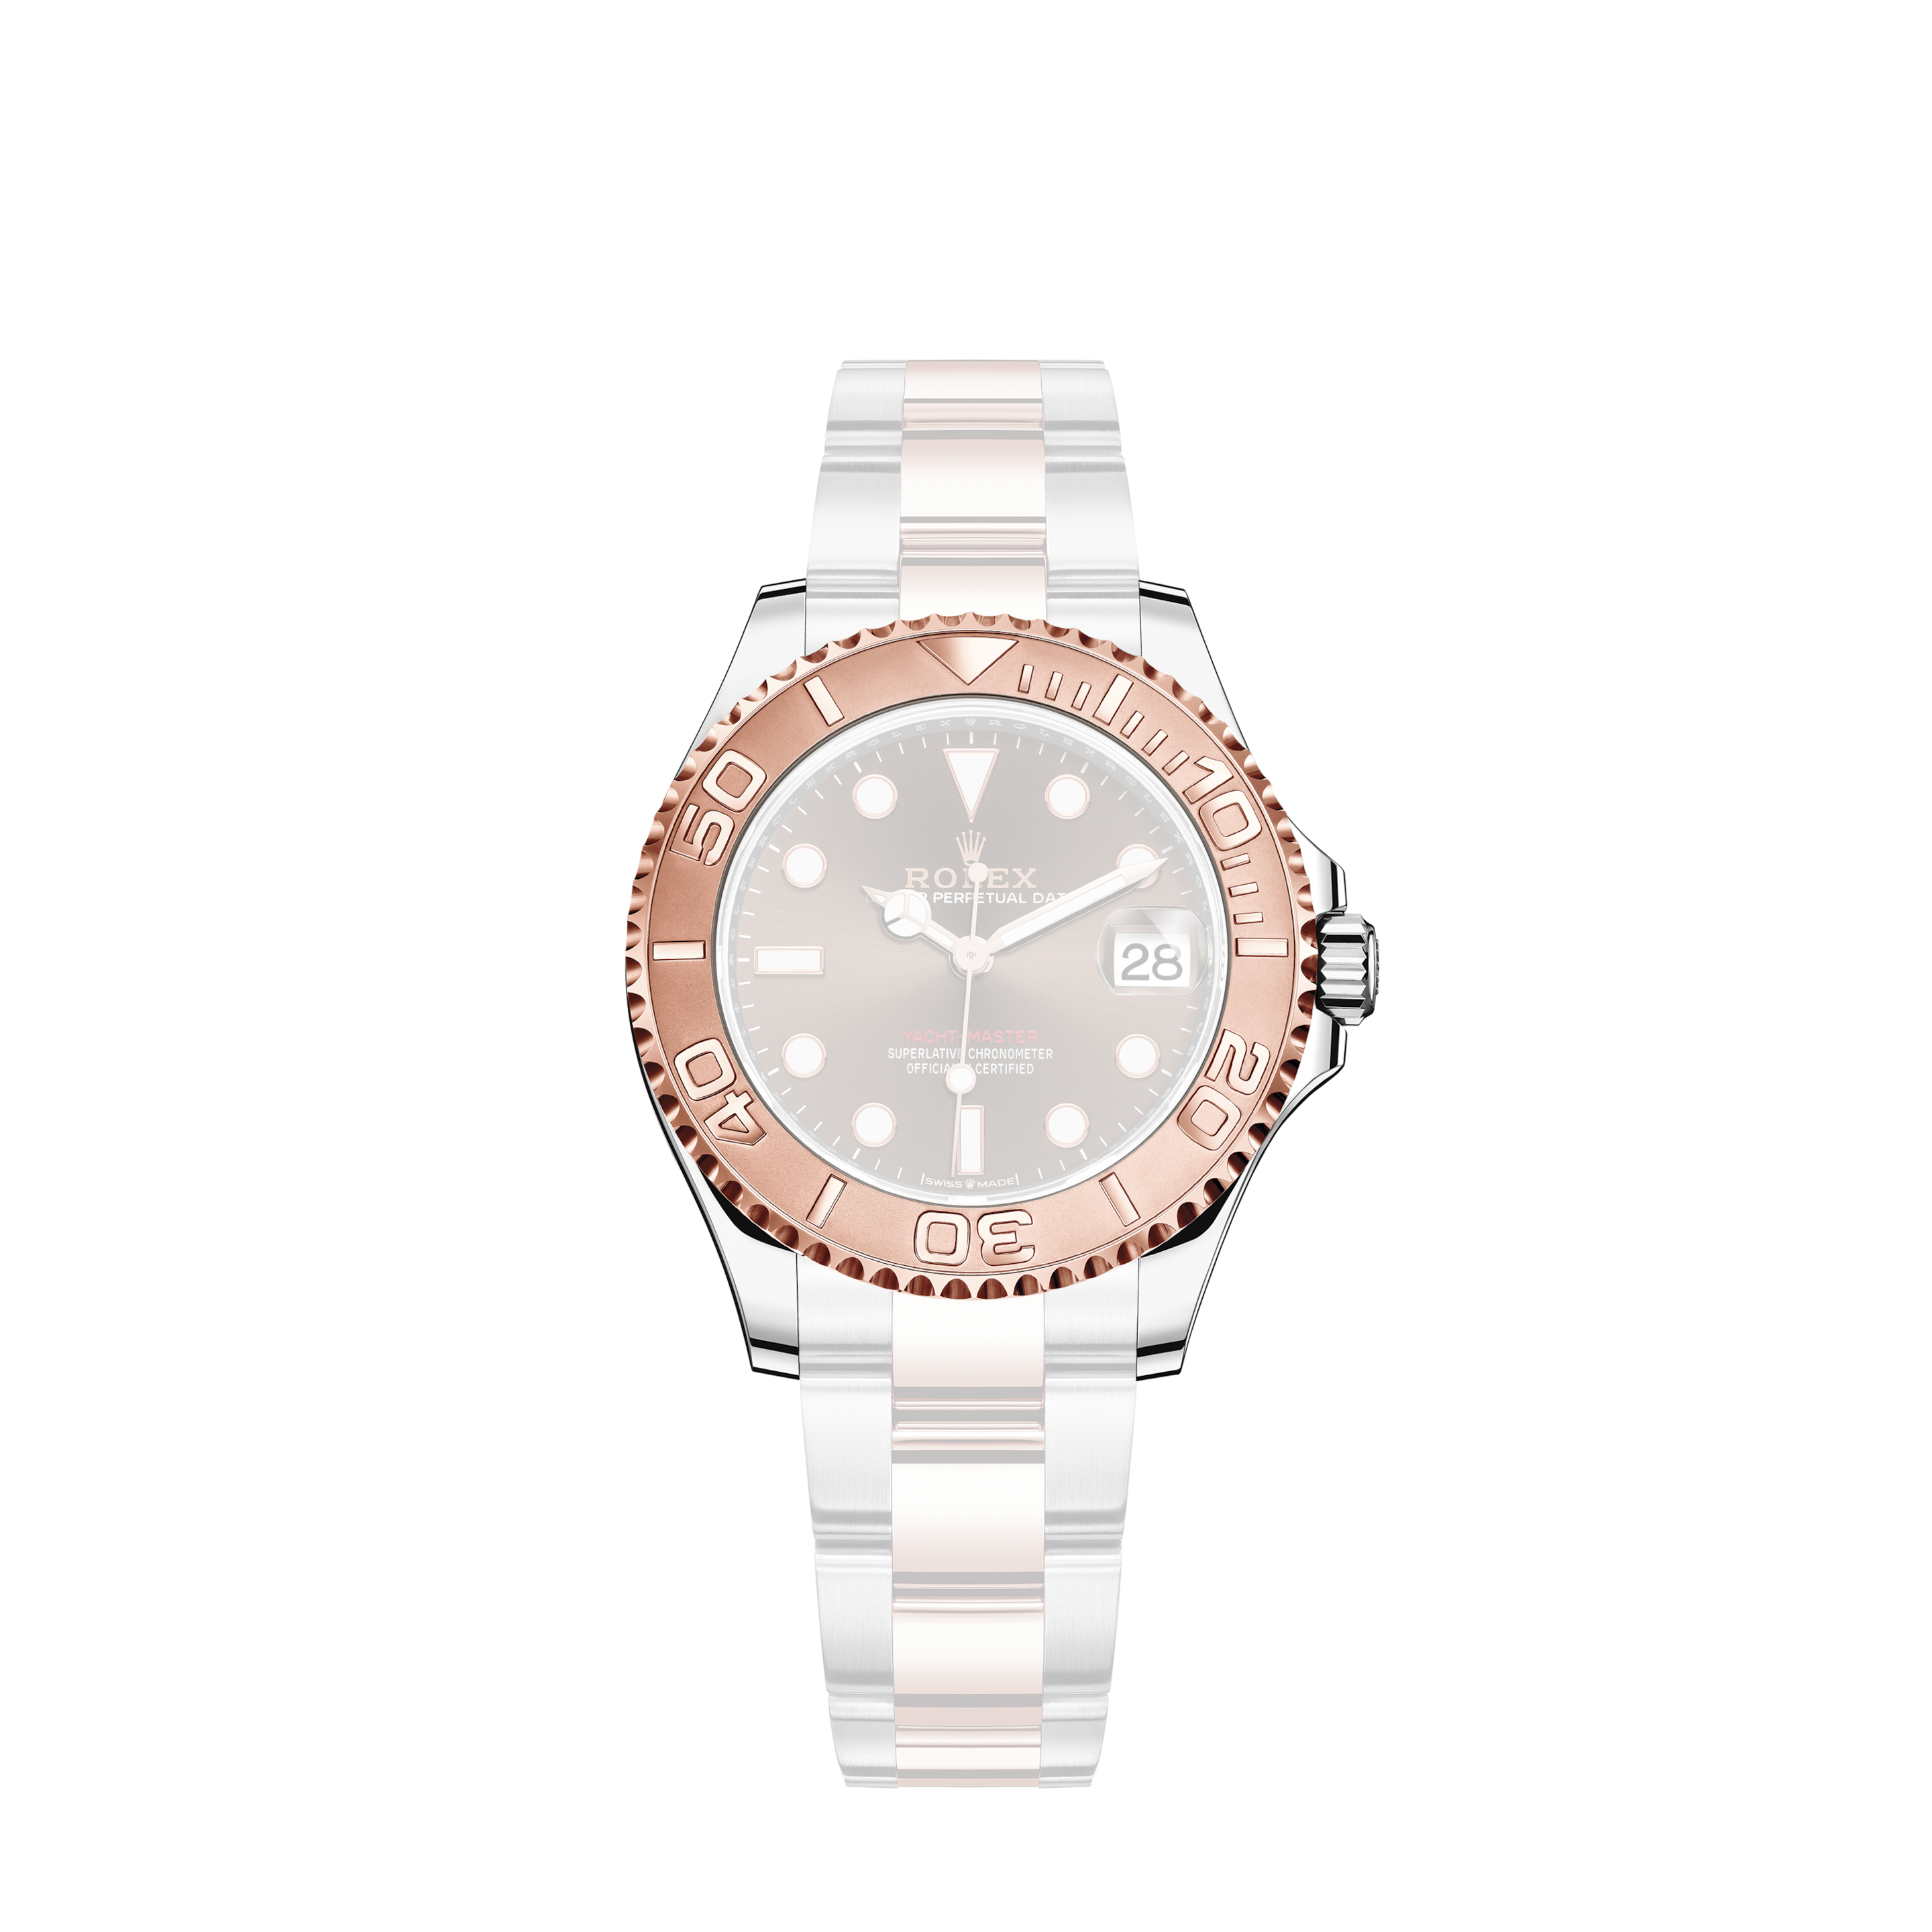 Rolex Datejust 31mm Stainless Steel and Rose Gold 278241 MOP Diamond OysterRolex Datejust 31mm Stainless Steel and Rose Gold 278241 Rhodium Index Jubilee